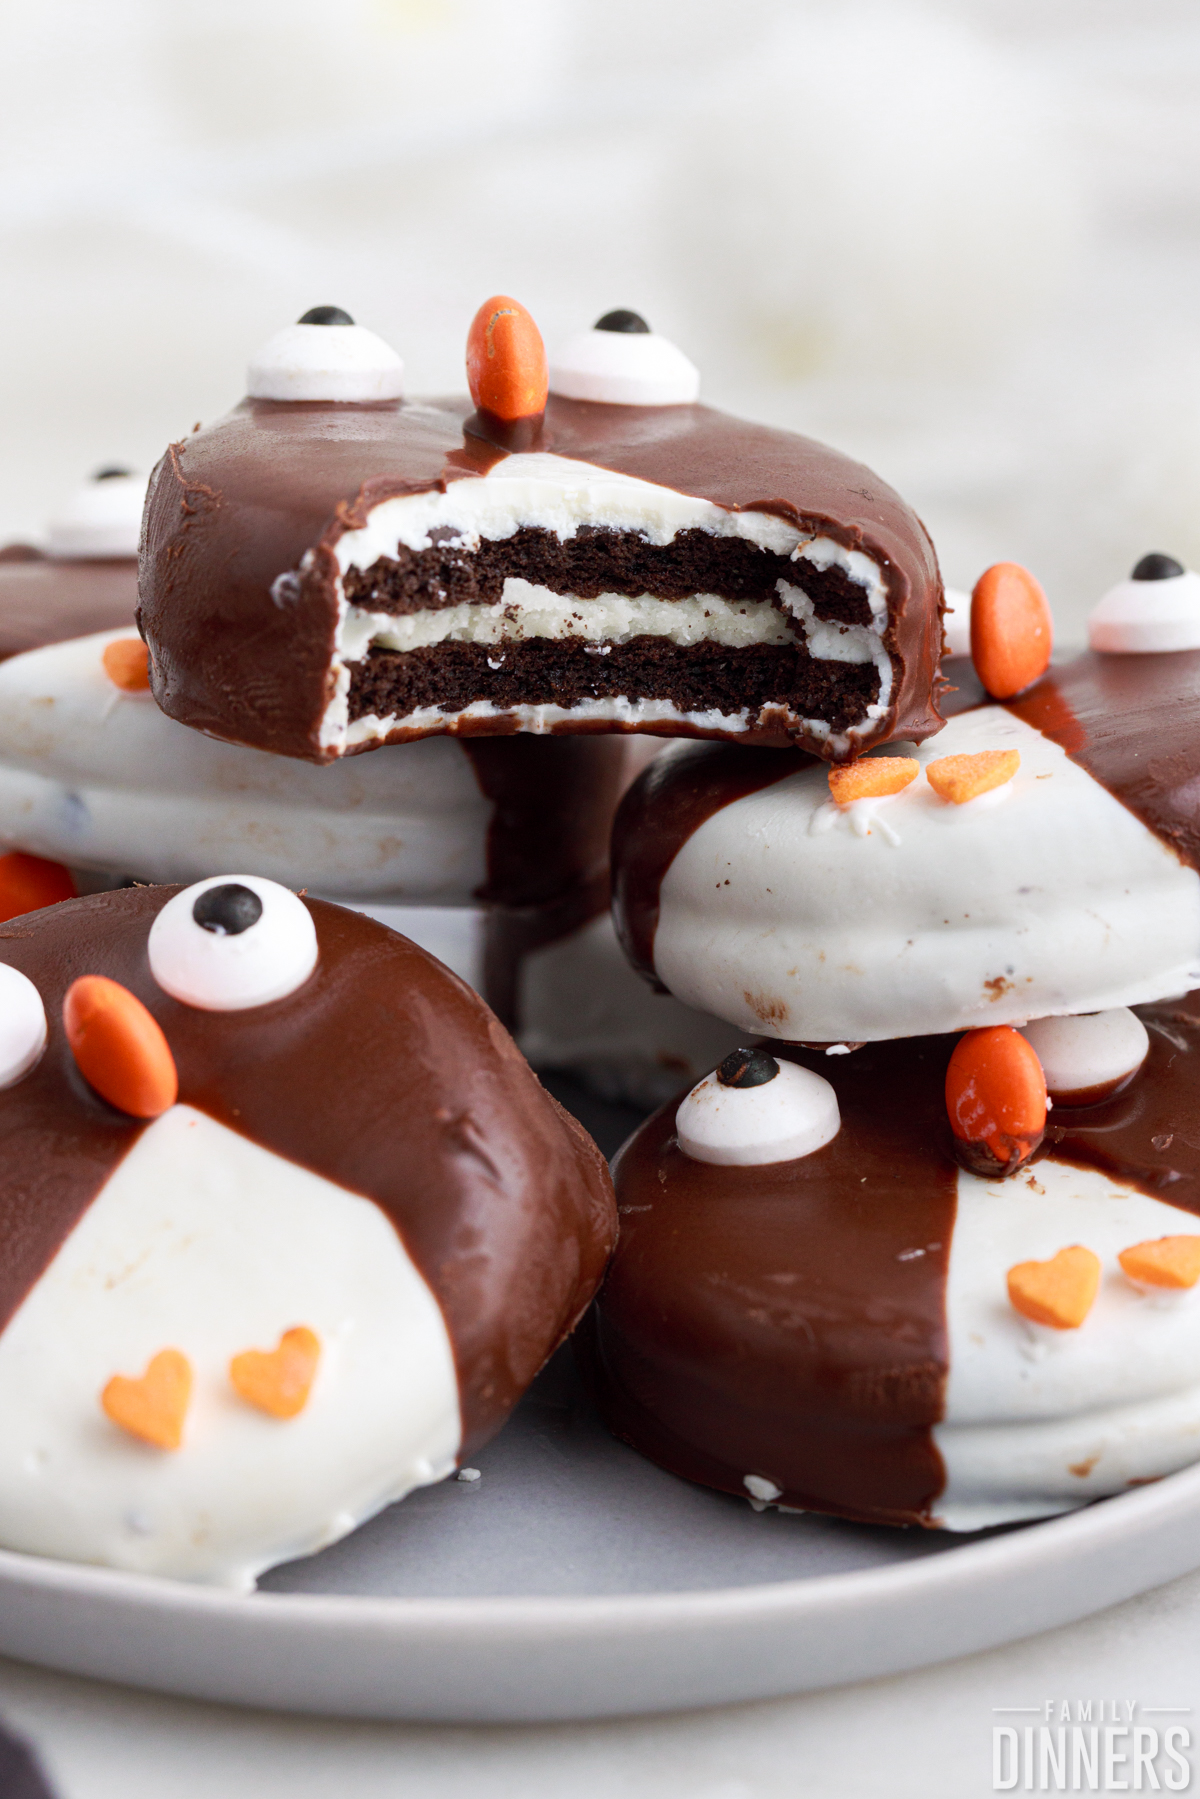 stack of penguin decorated cookies. Top cookie has a bite out of it.